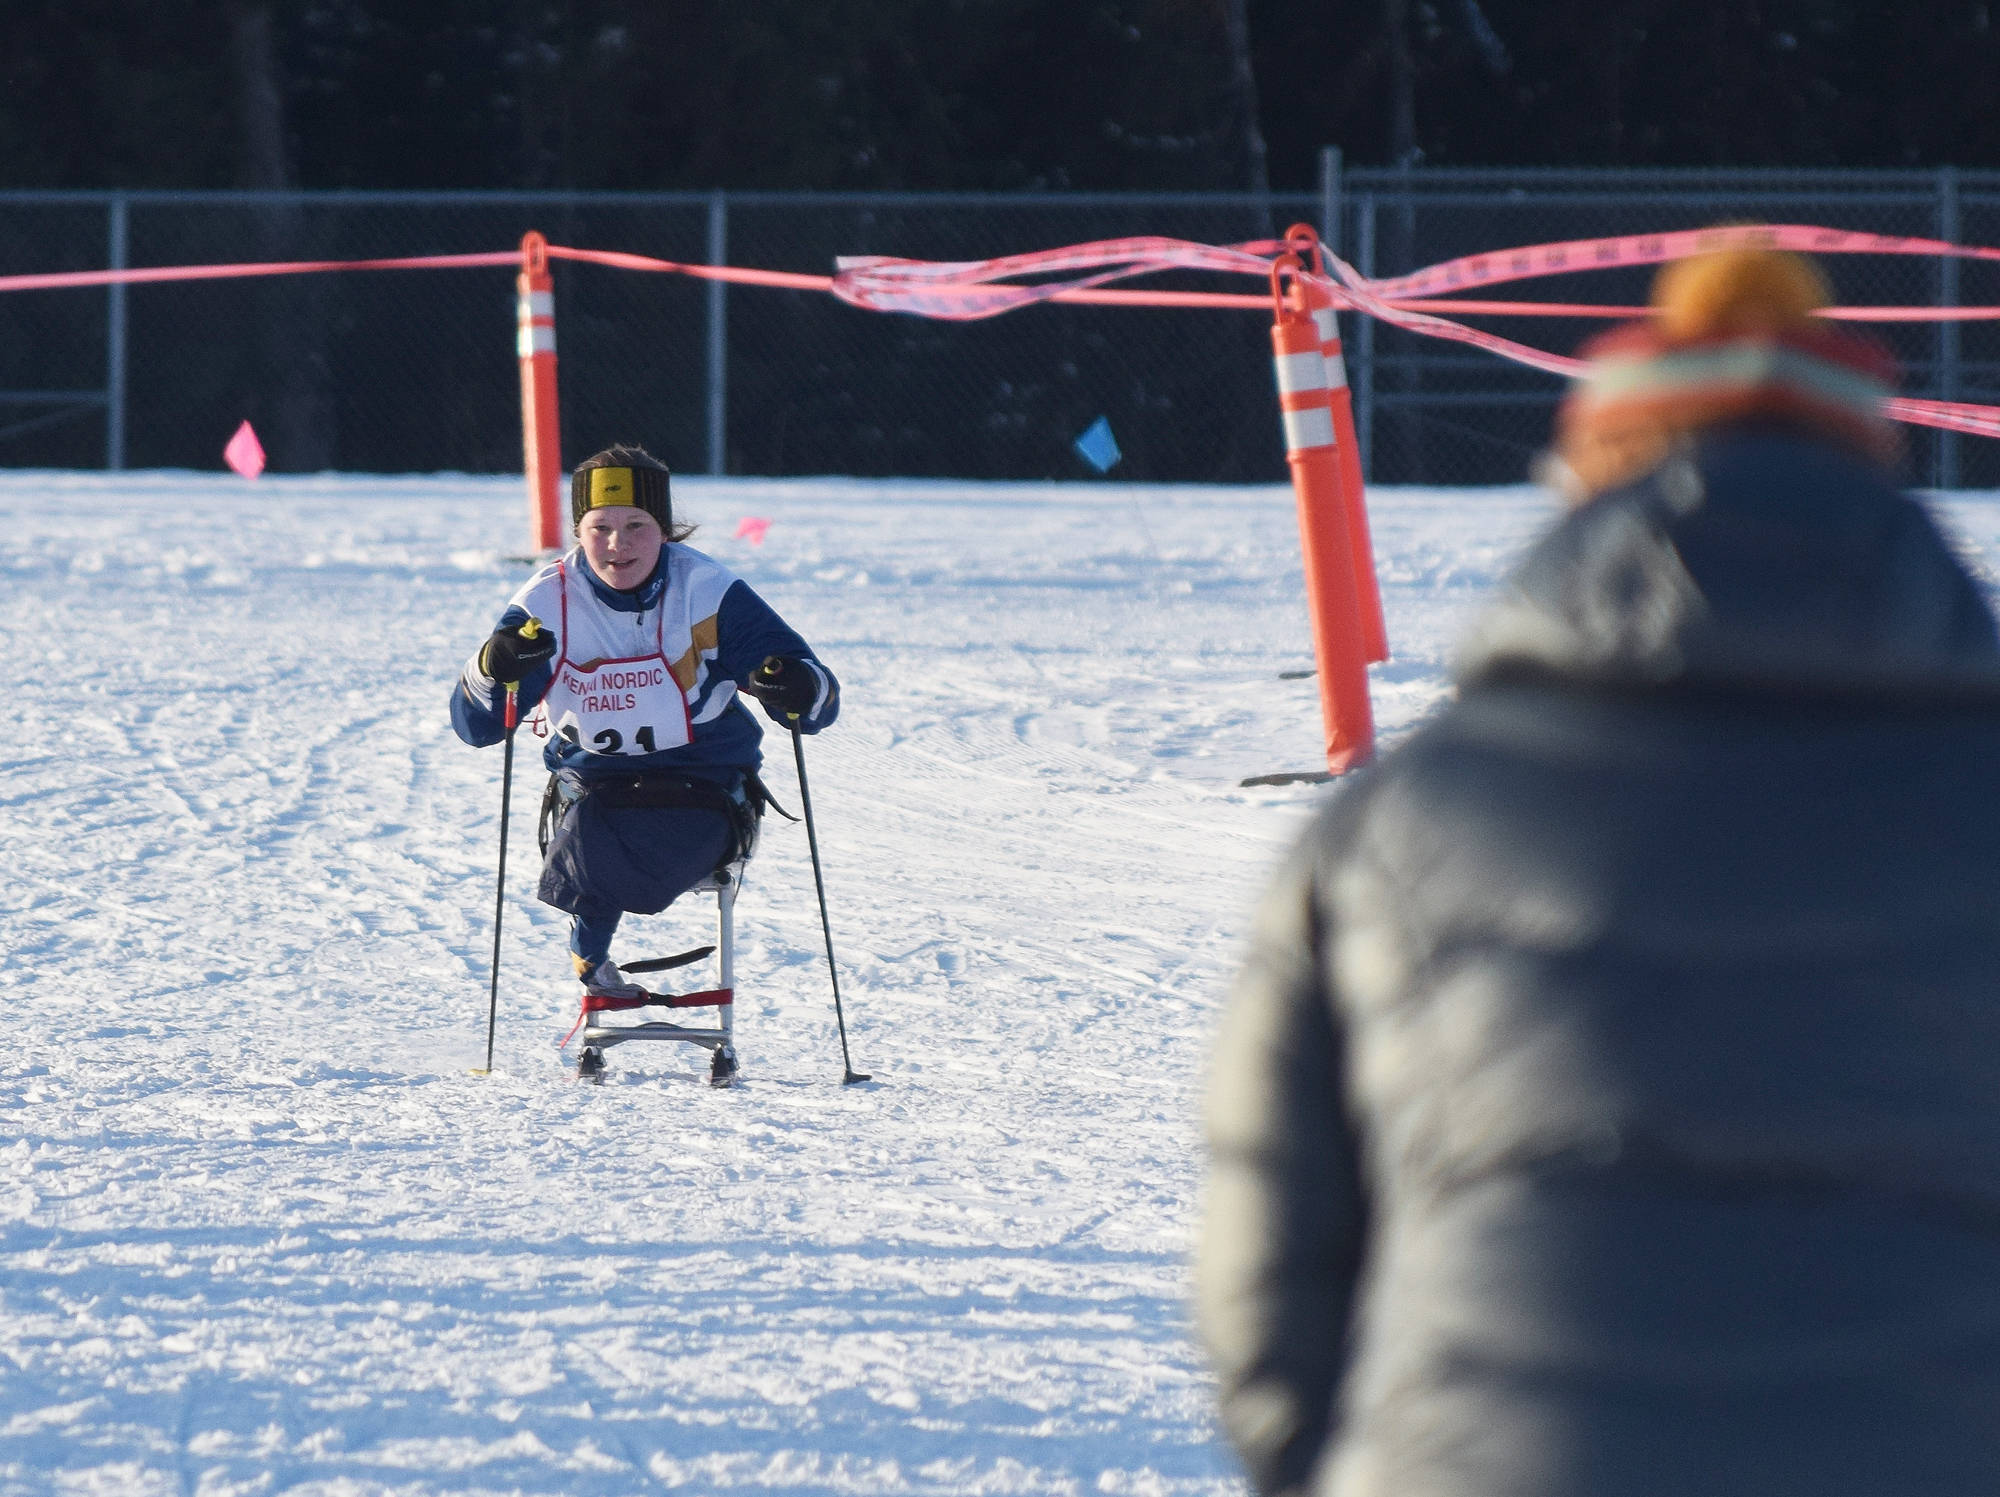 Angelica Haakenson of Homer approaches the finish line to cheers Friday, Jan. 26, 2018 in the Kenai Klassic races at the Tsalteshi Trails in Soldotna, Alaska. (Photo by Joey Klecka/Peninsula Clarion)